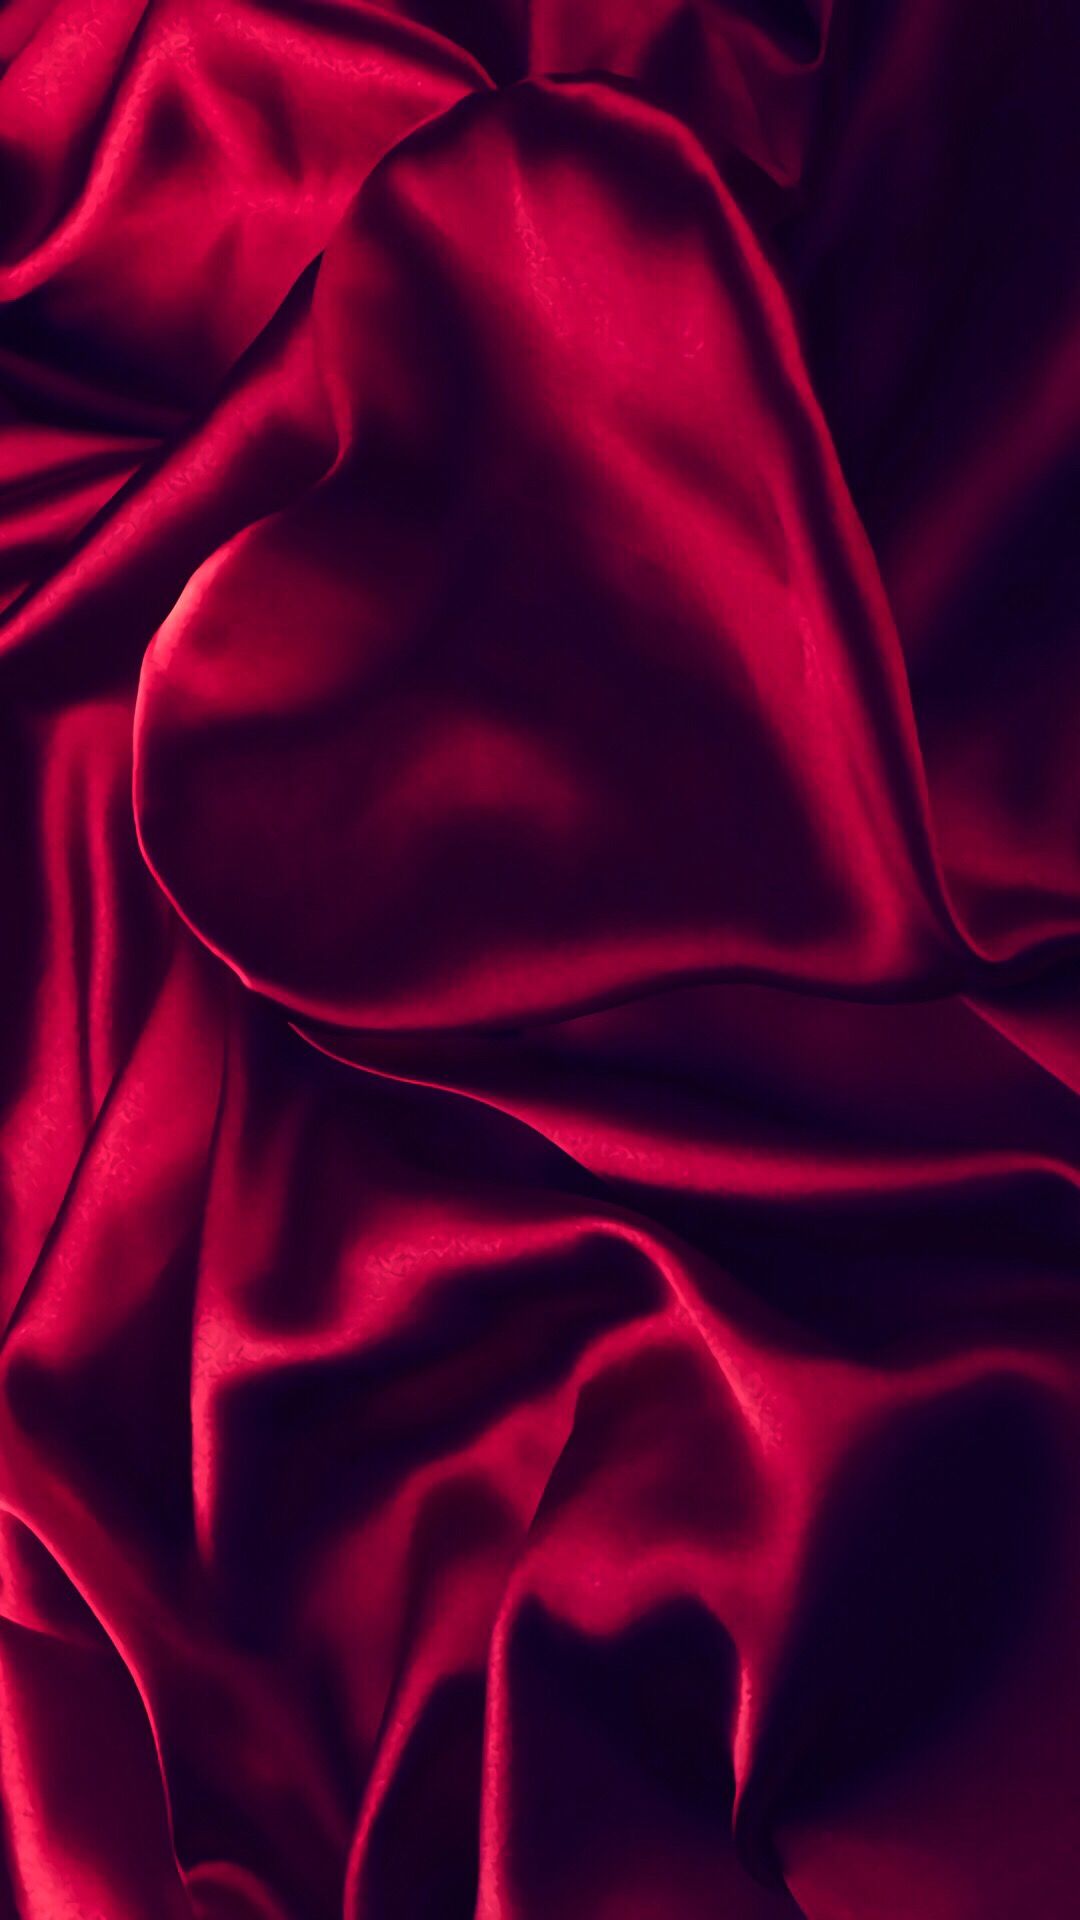 Background Red Silk Aesthetic - 1080x1920 Wallpaper 